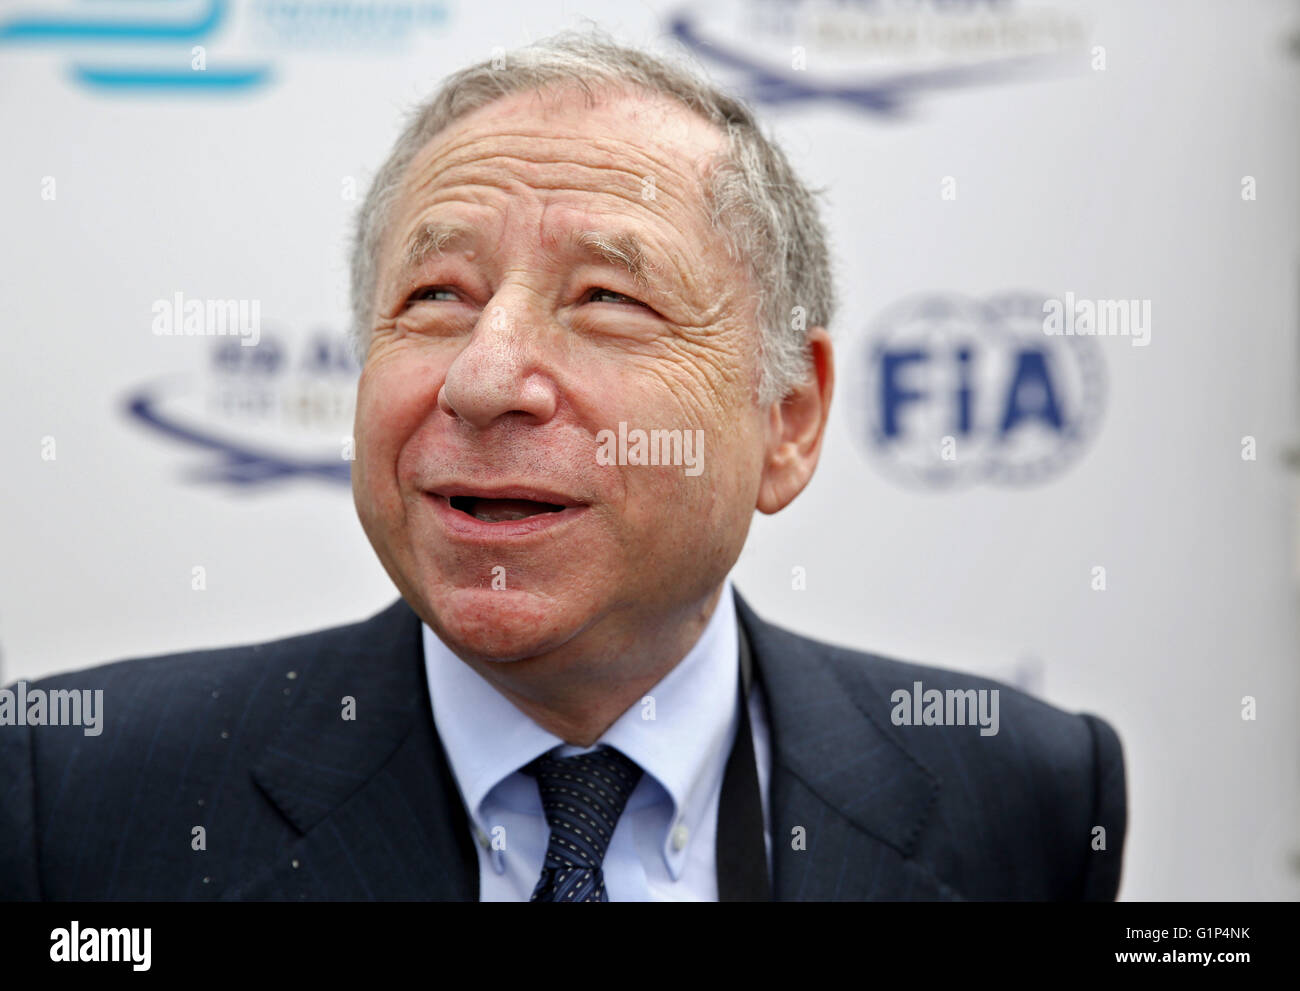 Leipzig, Germany. 18th May, 2016. Jean Todt, president of the International Automobile Federation (FIA), seen at the world summit of transport ministers in Leipzig, Germany, 18 May 2016. Some 1,000 participants from 60 countries are expected to attend the three-day summit held by the International Transport Forum of the Organisation for Economic Co-operation and Development (OECD). Photo: JAN WOITAS/dpa/Alamy Live News Stock Photo